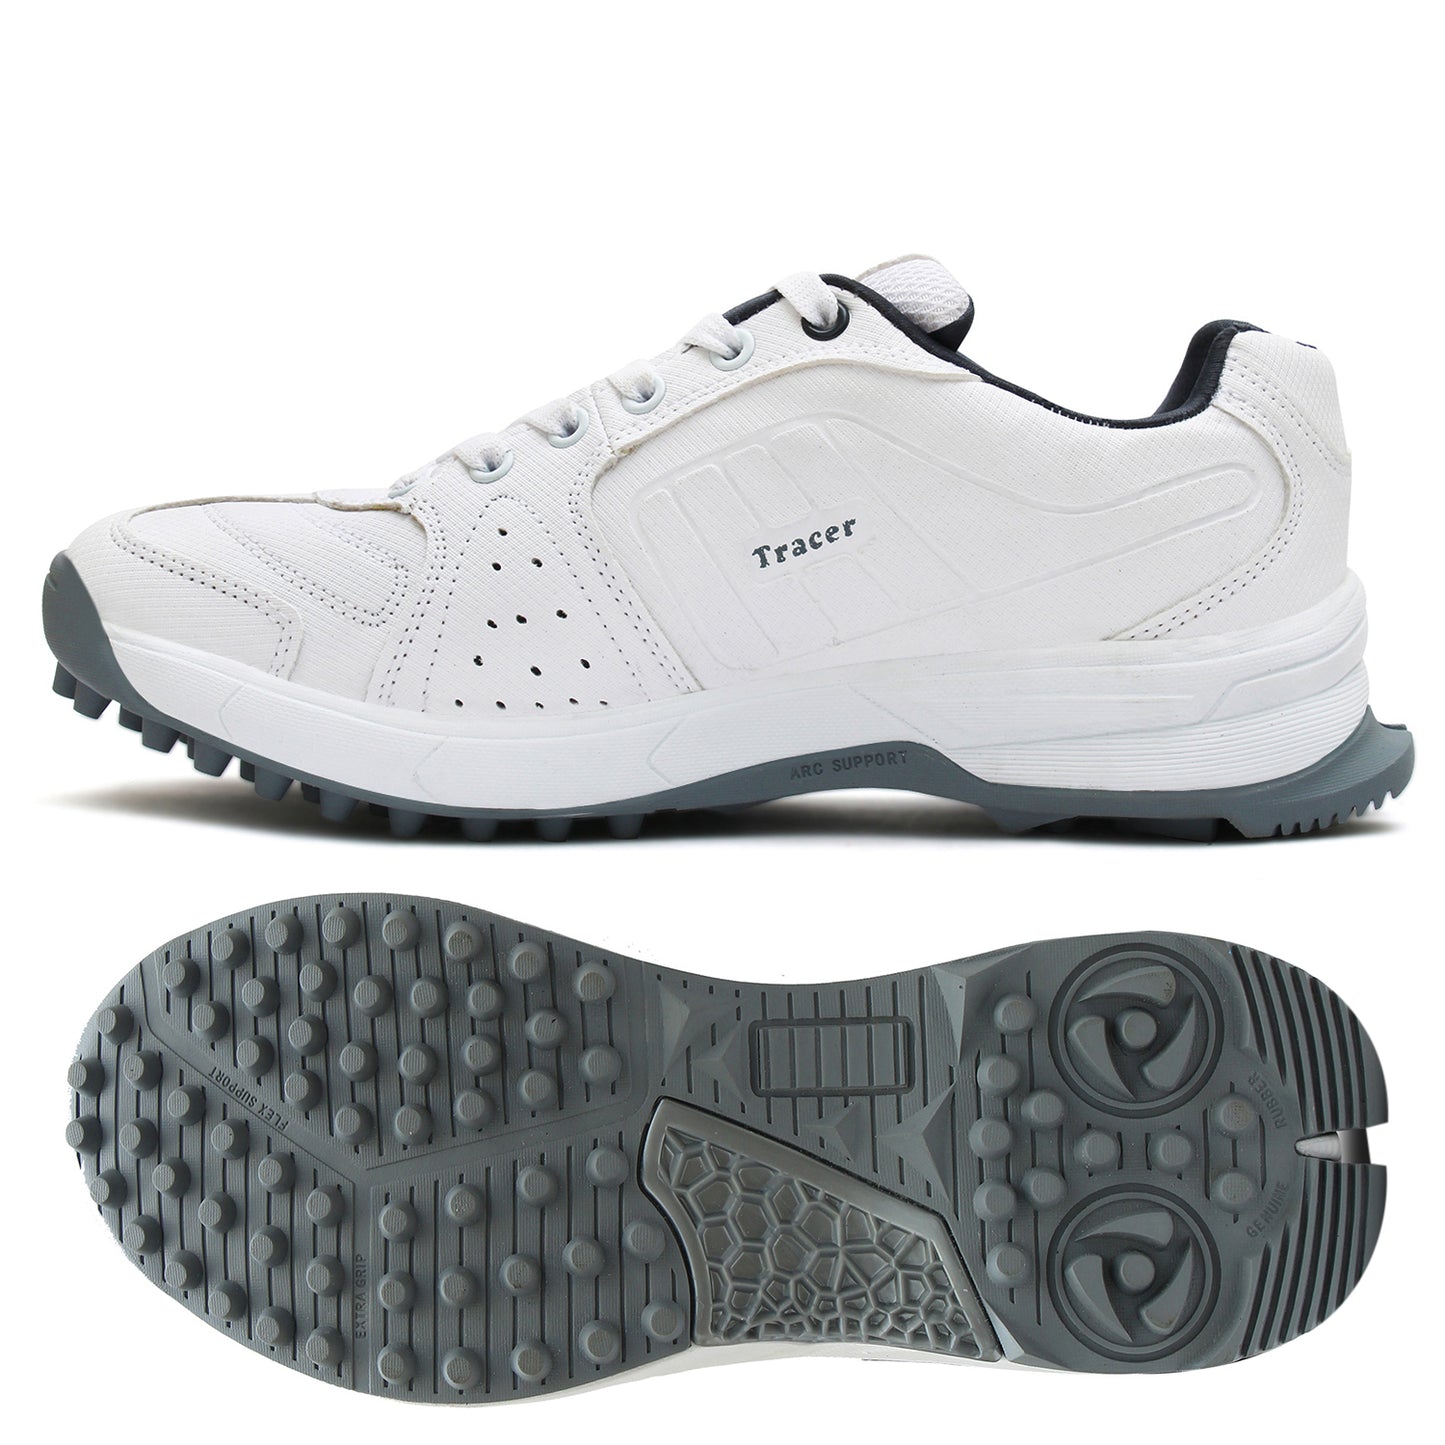 Cricket Shoes White Grey